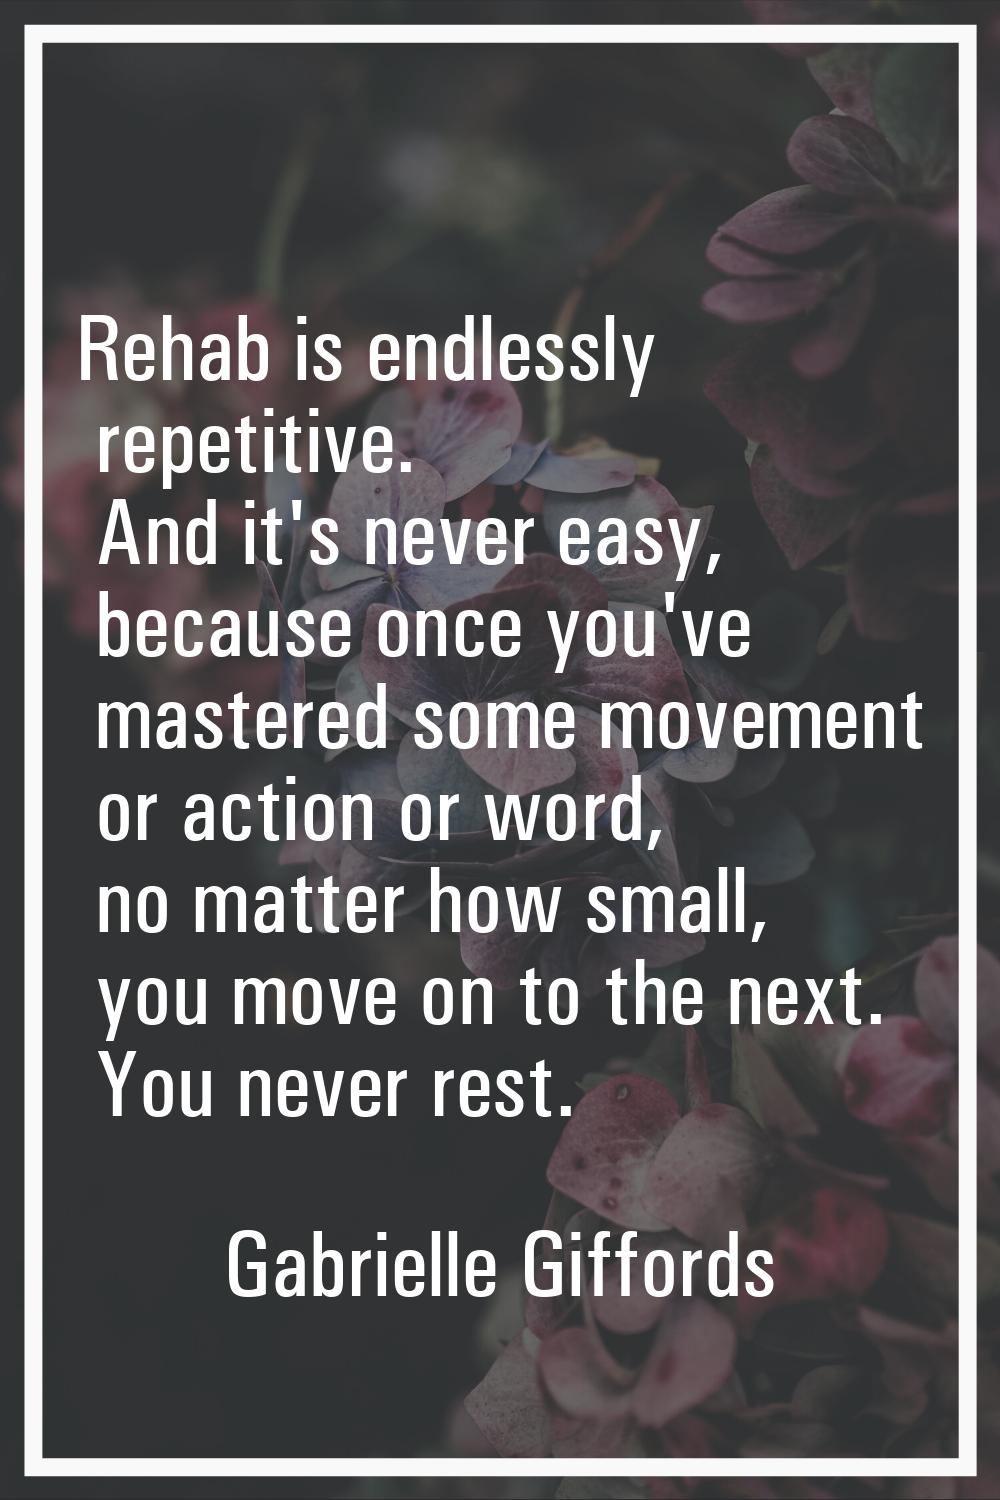 Rehab is endlessly repetitive. And it's never easy, because once you've mastered some movement or a